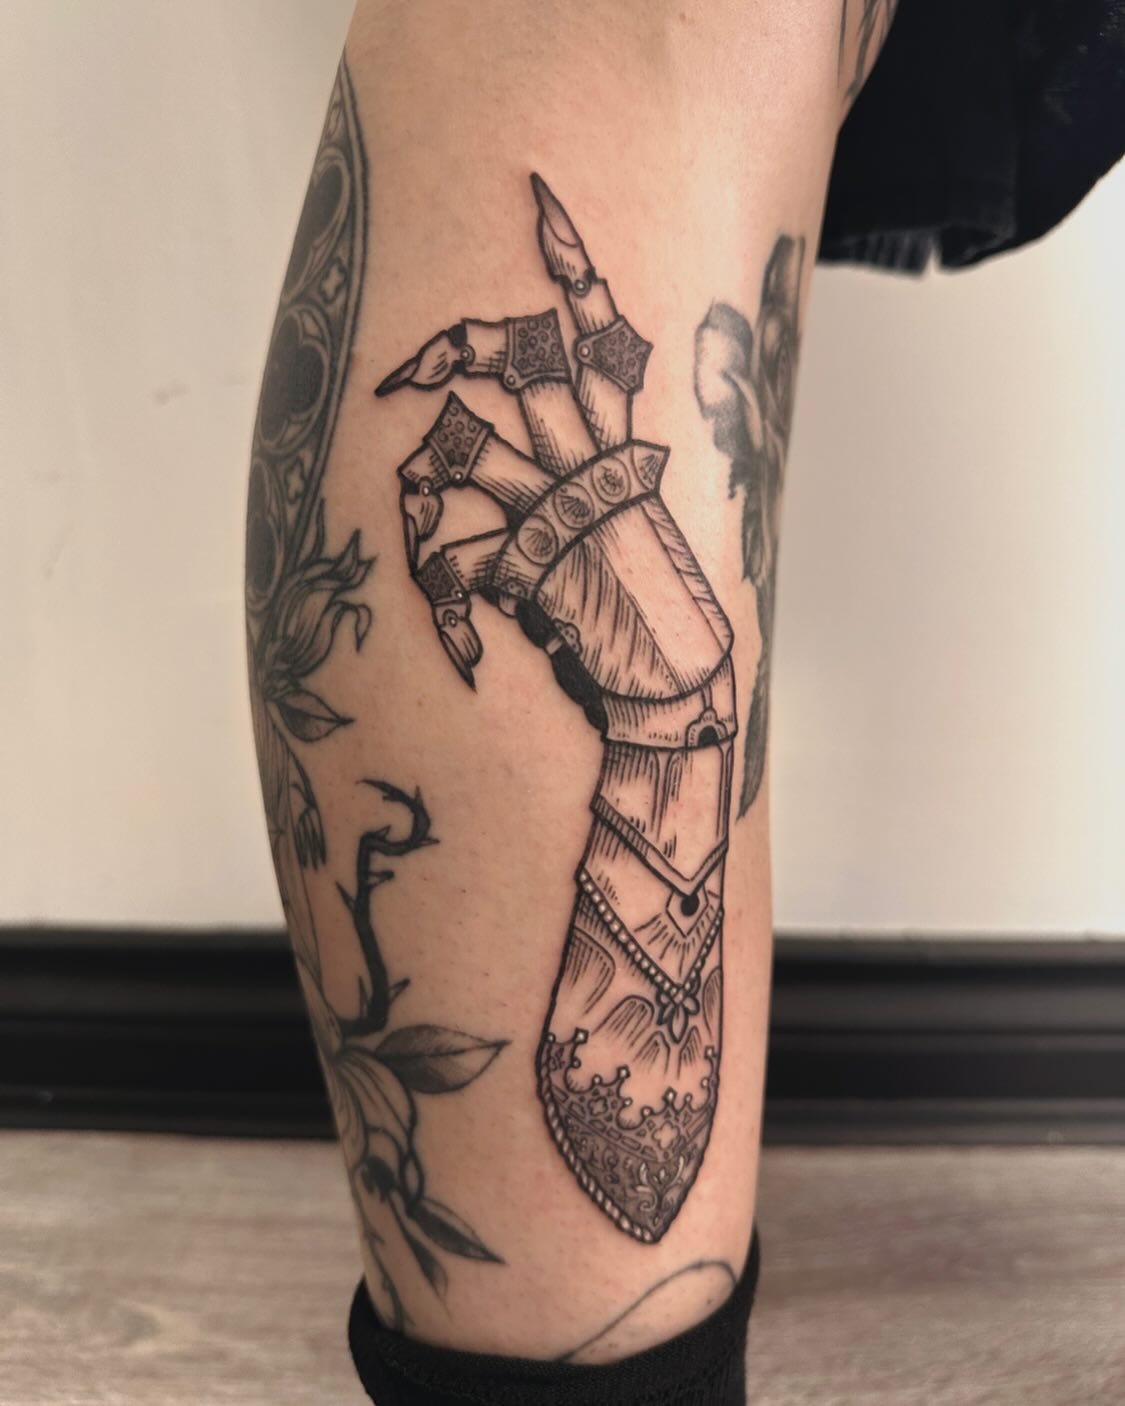 ⚜️leg adornment⚜️
Was able to do this witchy gauntlet on @circecurio today!
Thanks for coming and it was great to hang out!
.
.
.
.
.
.
.
.
.
#tattoo #tattoos #witchy #goth #gothic #medieval #medievalart #pagan #finelinetattoo #art